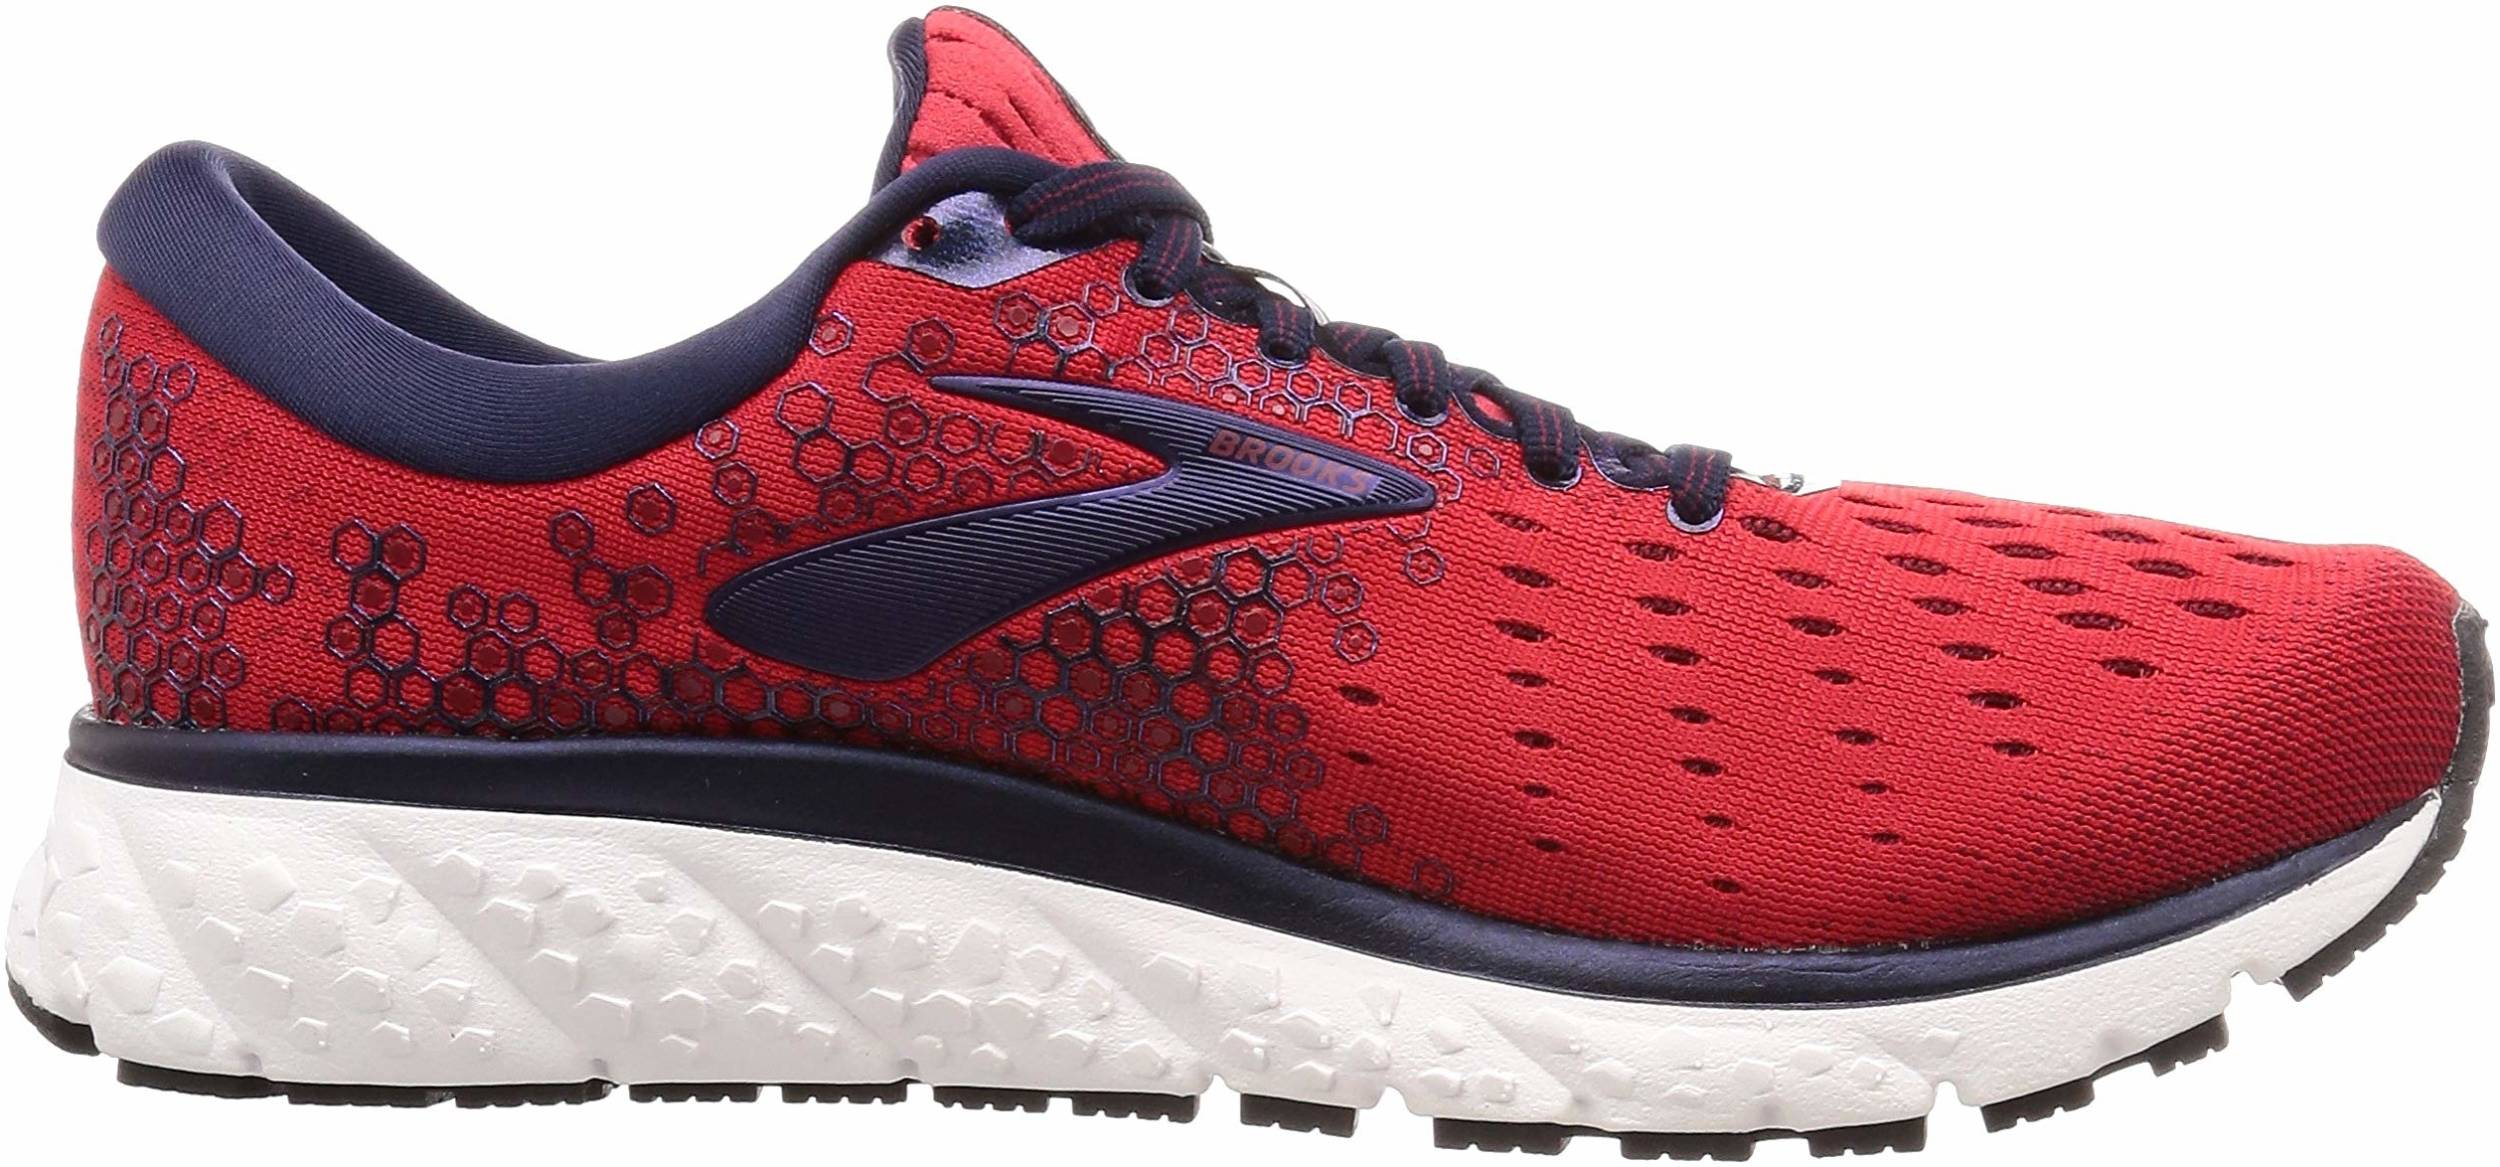 Save 26% on Red Brooks Running Shoes 